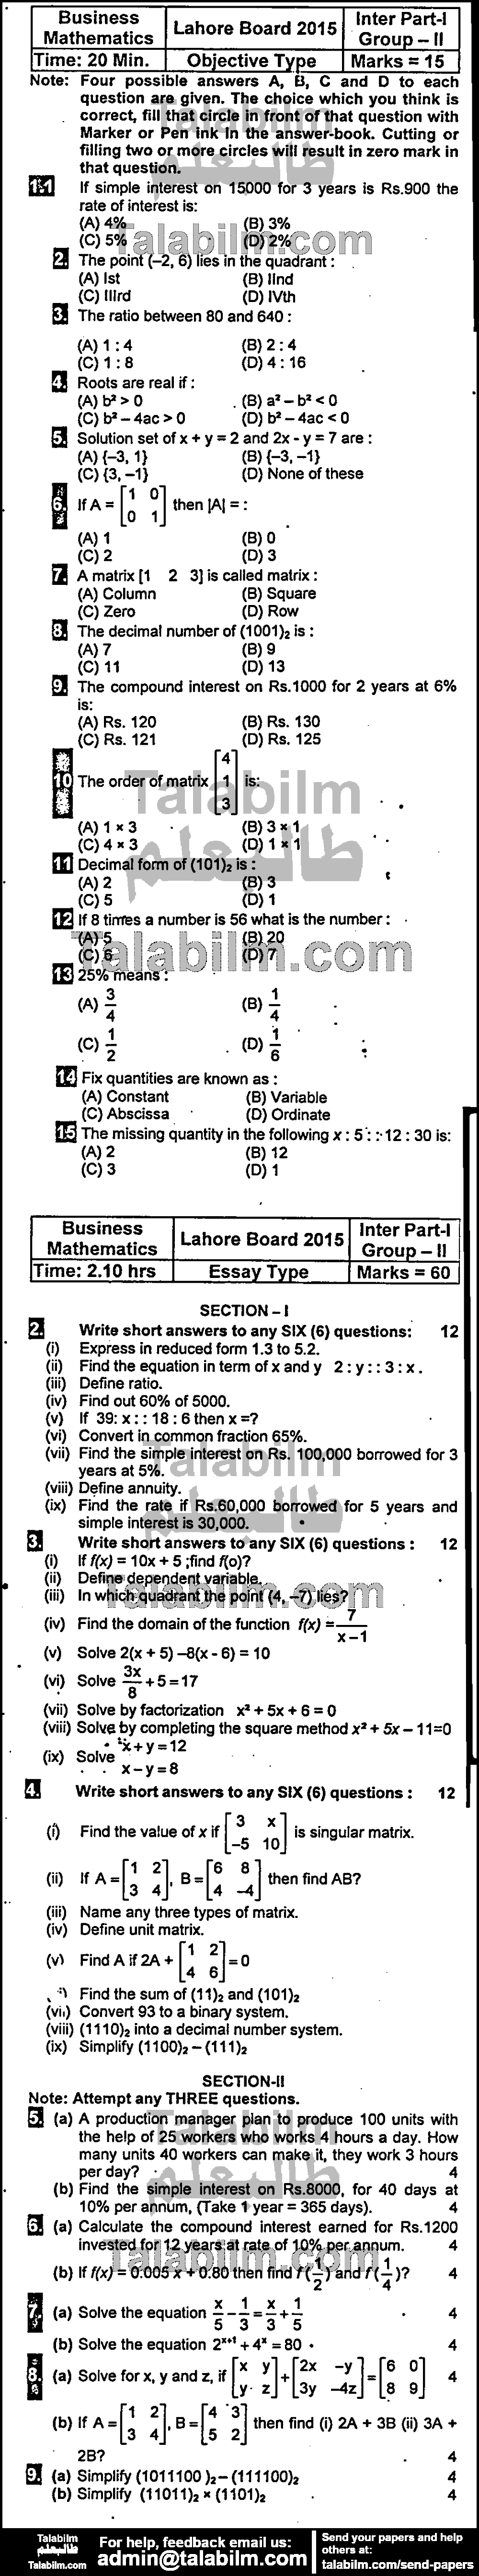 Business Mathematics 0 past paper for Group-II 2015